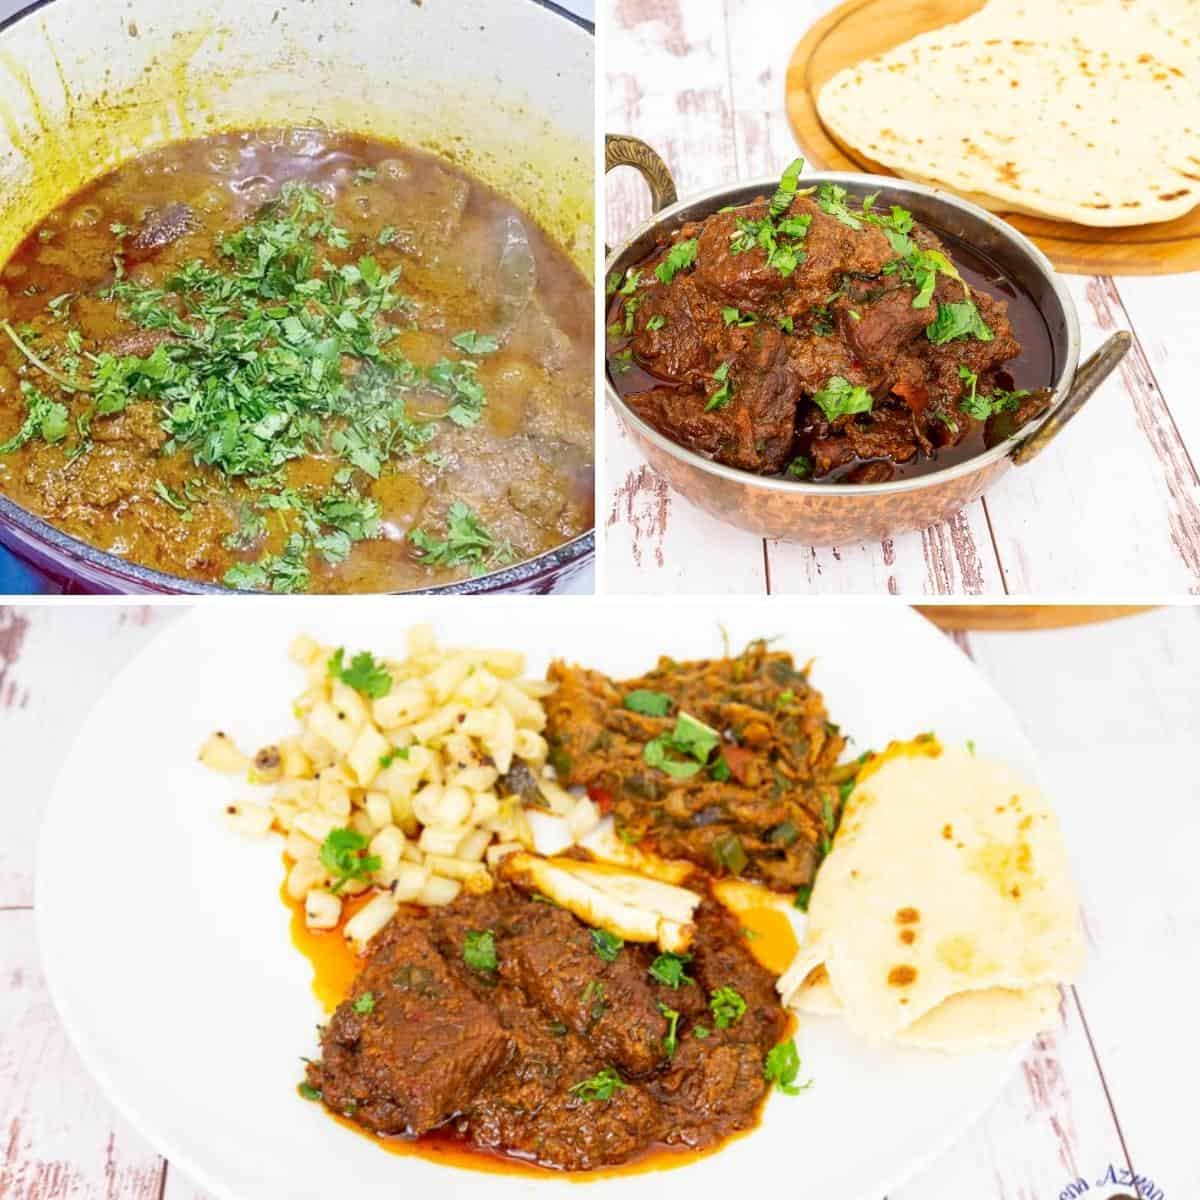 Collage showing curry served in plate.